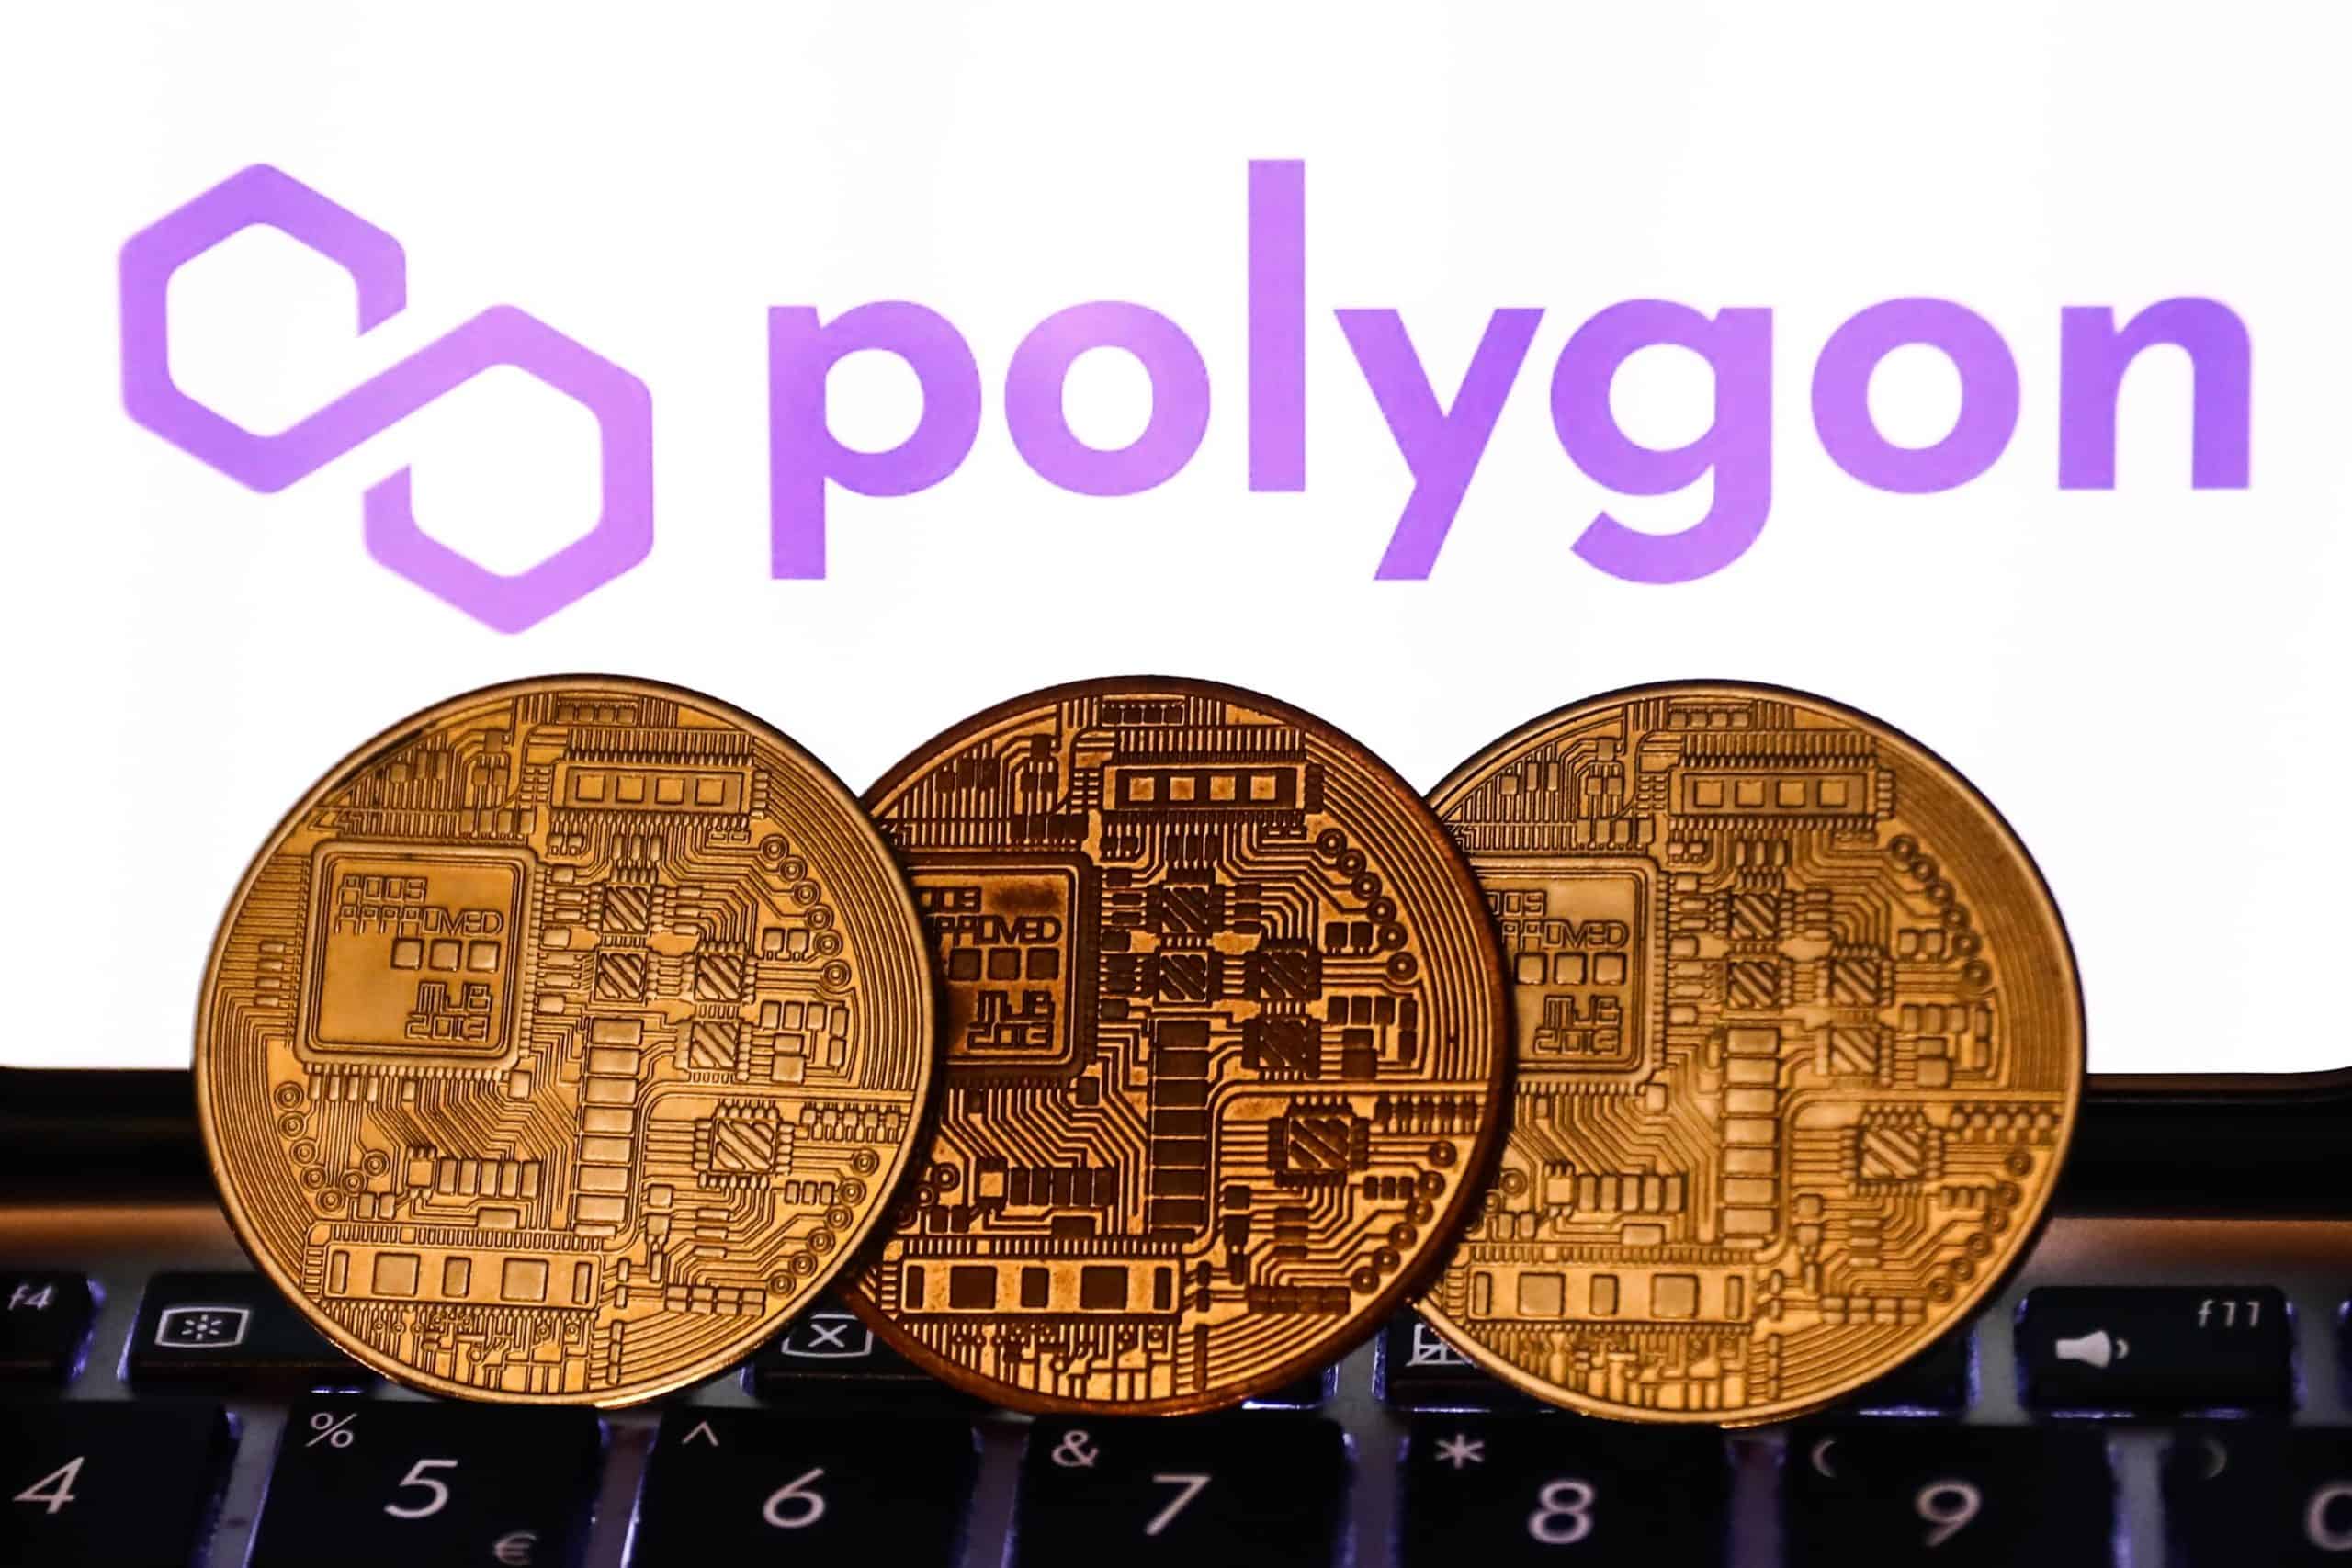 Polygon has raised $450 million in funding from VC firms led by Sequoia